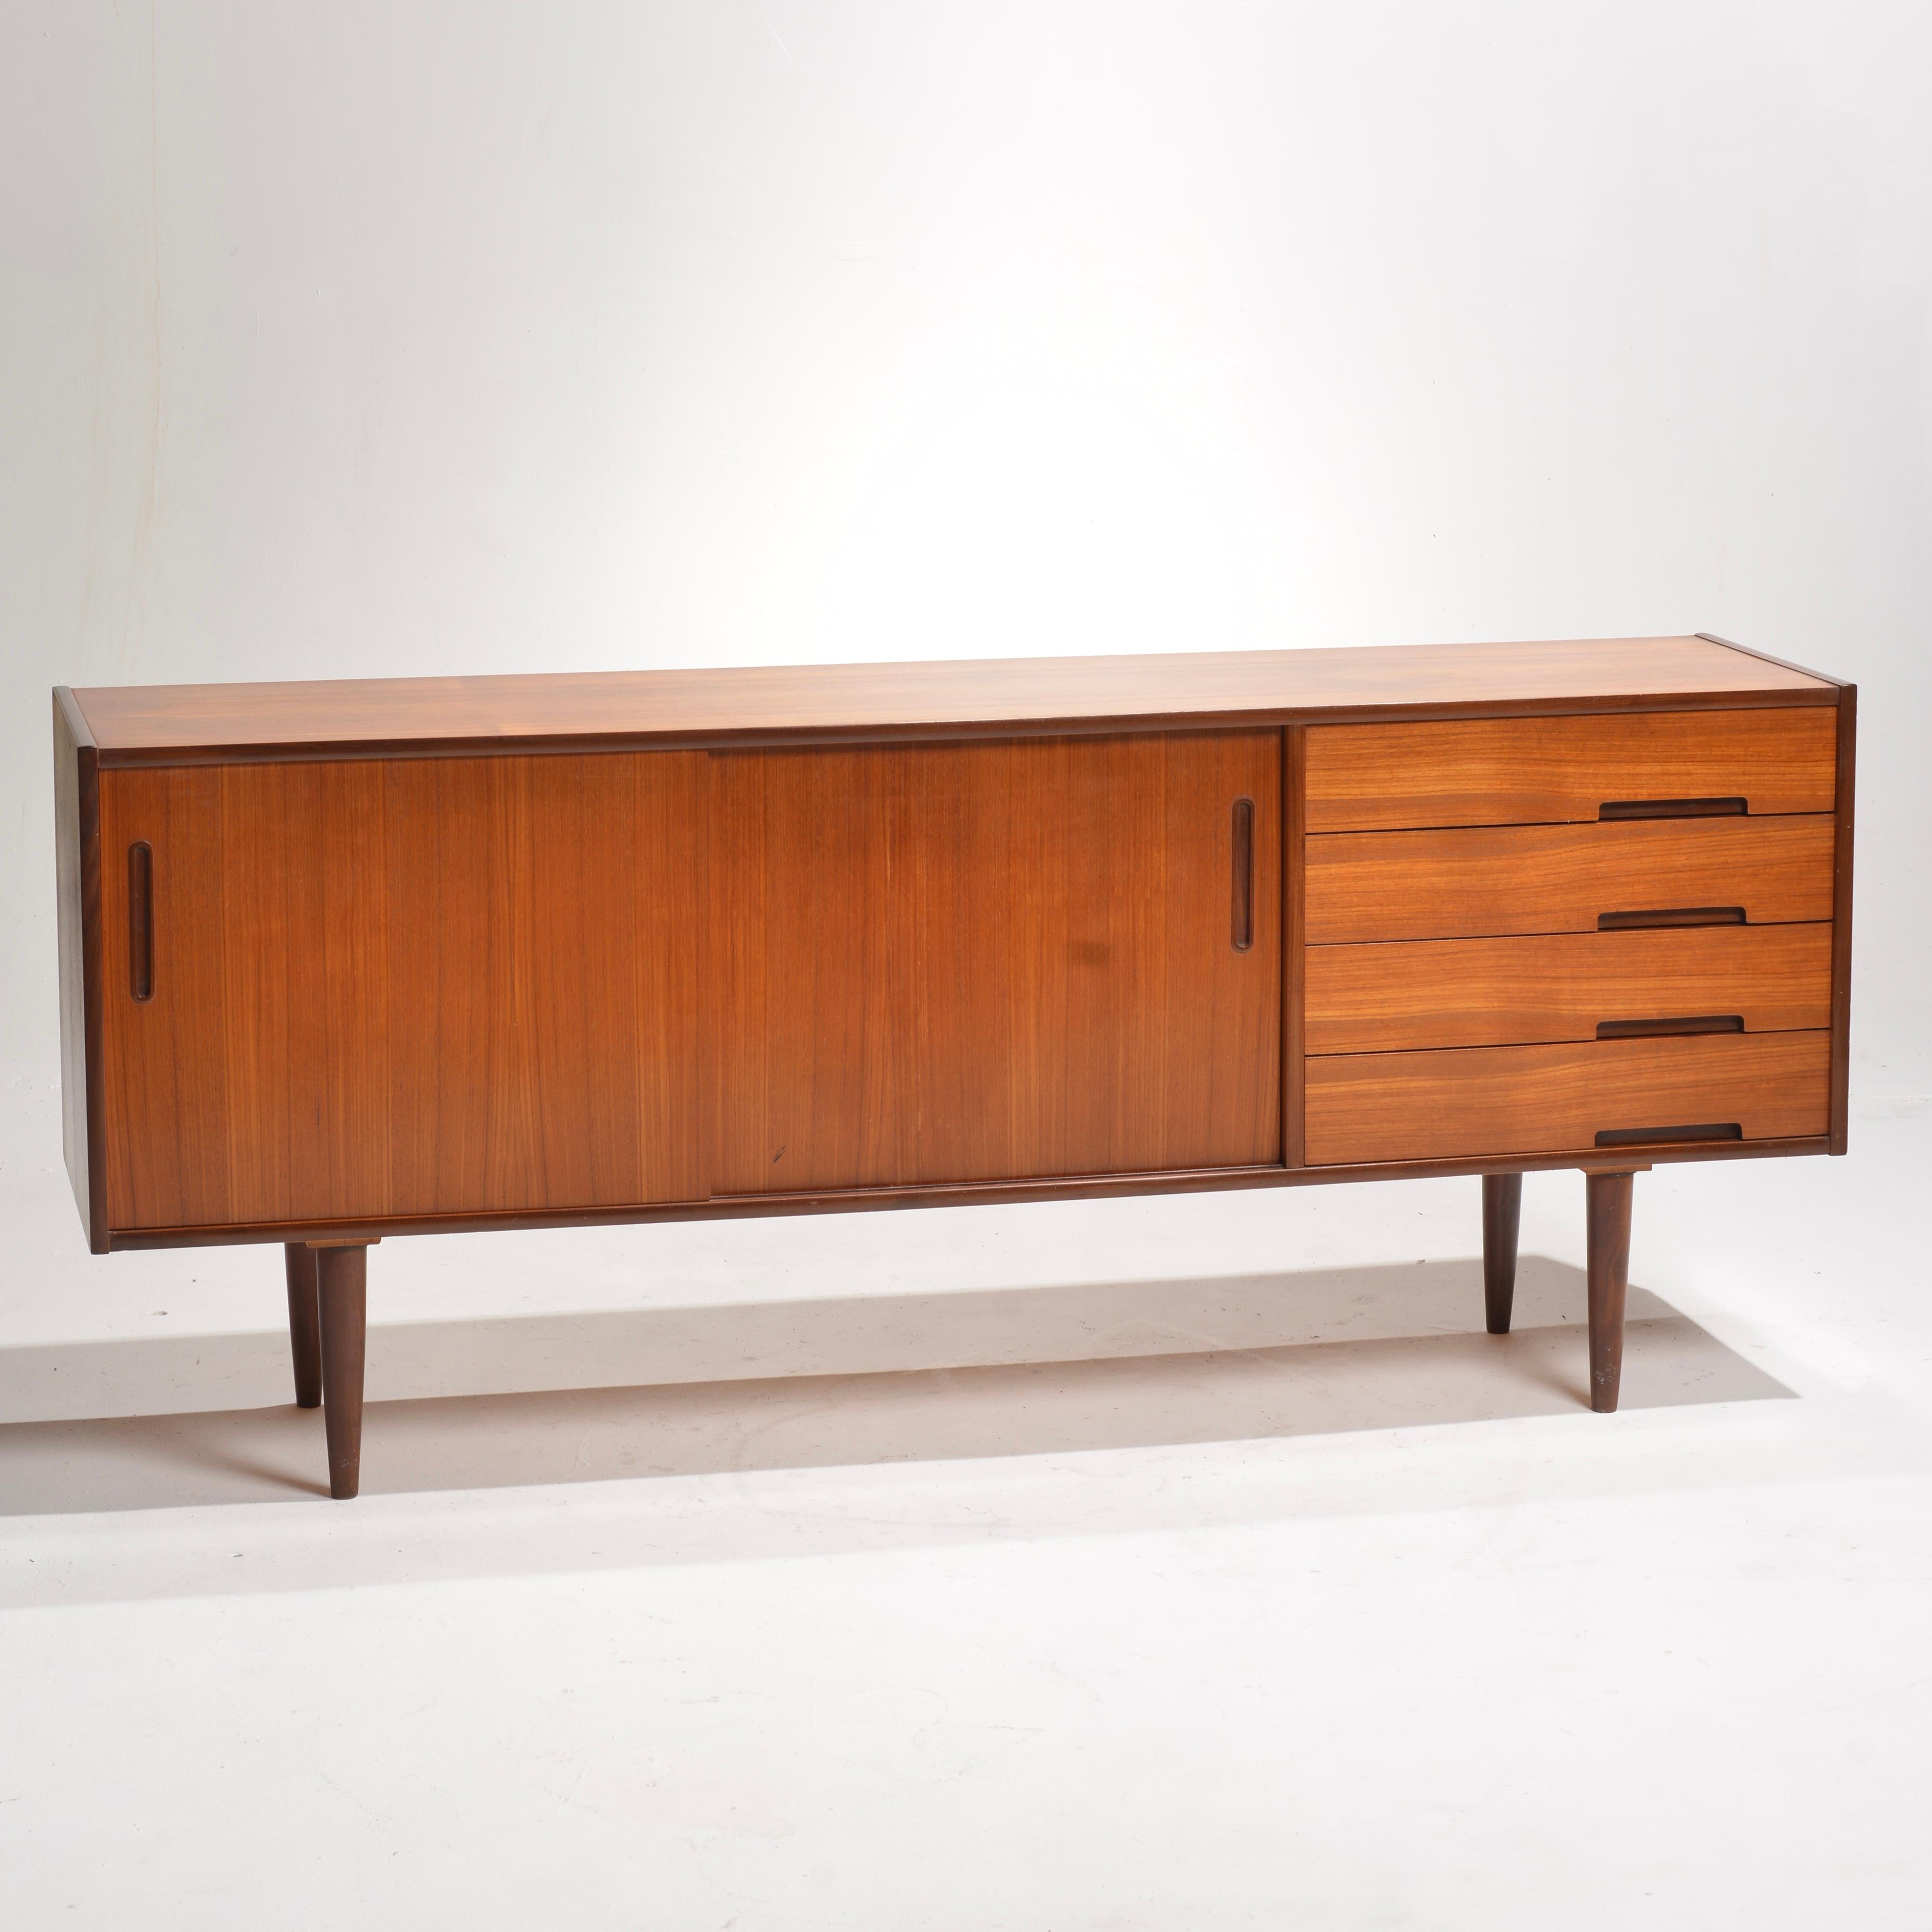 Introducing the stunning teak 'Trento' credenza designed by Nils Jonsson for Hugo Troeds in Sweden. This exceptional piece provides an array of generous storage options such as shelves, and drawers. Highlighting finely contoured drawer pulls,